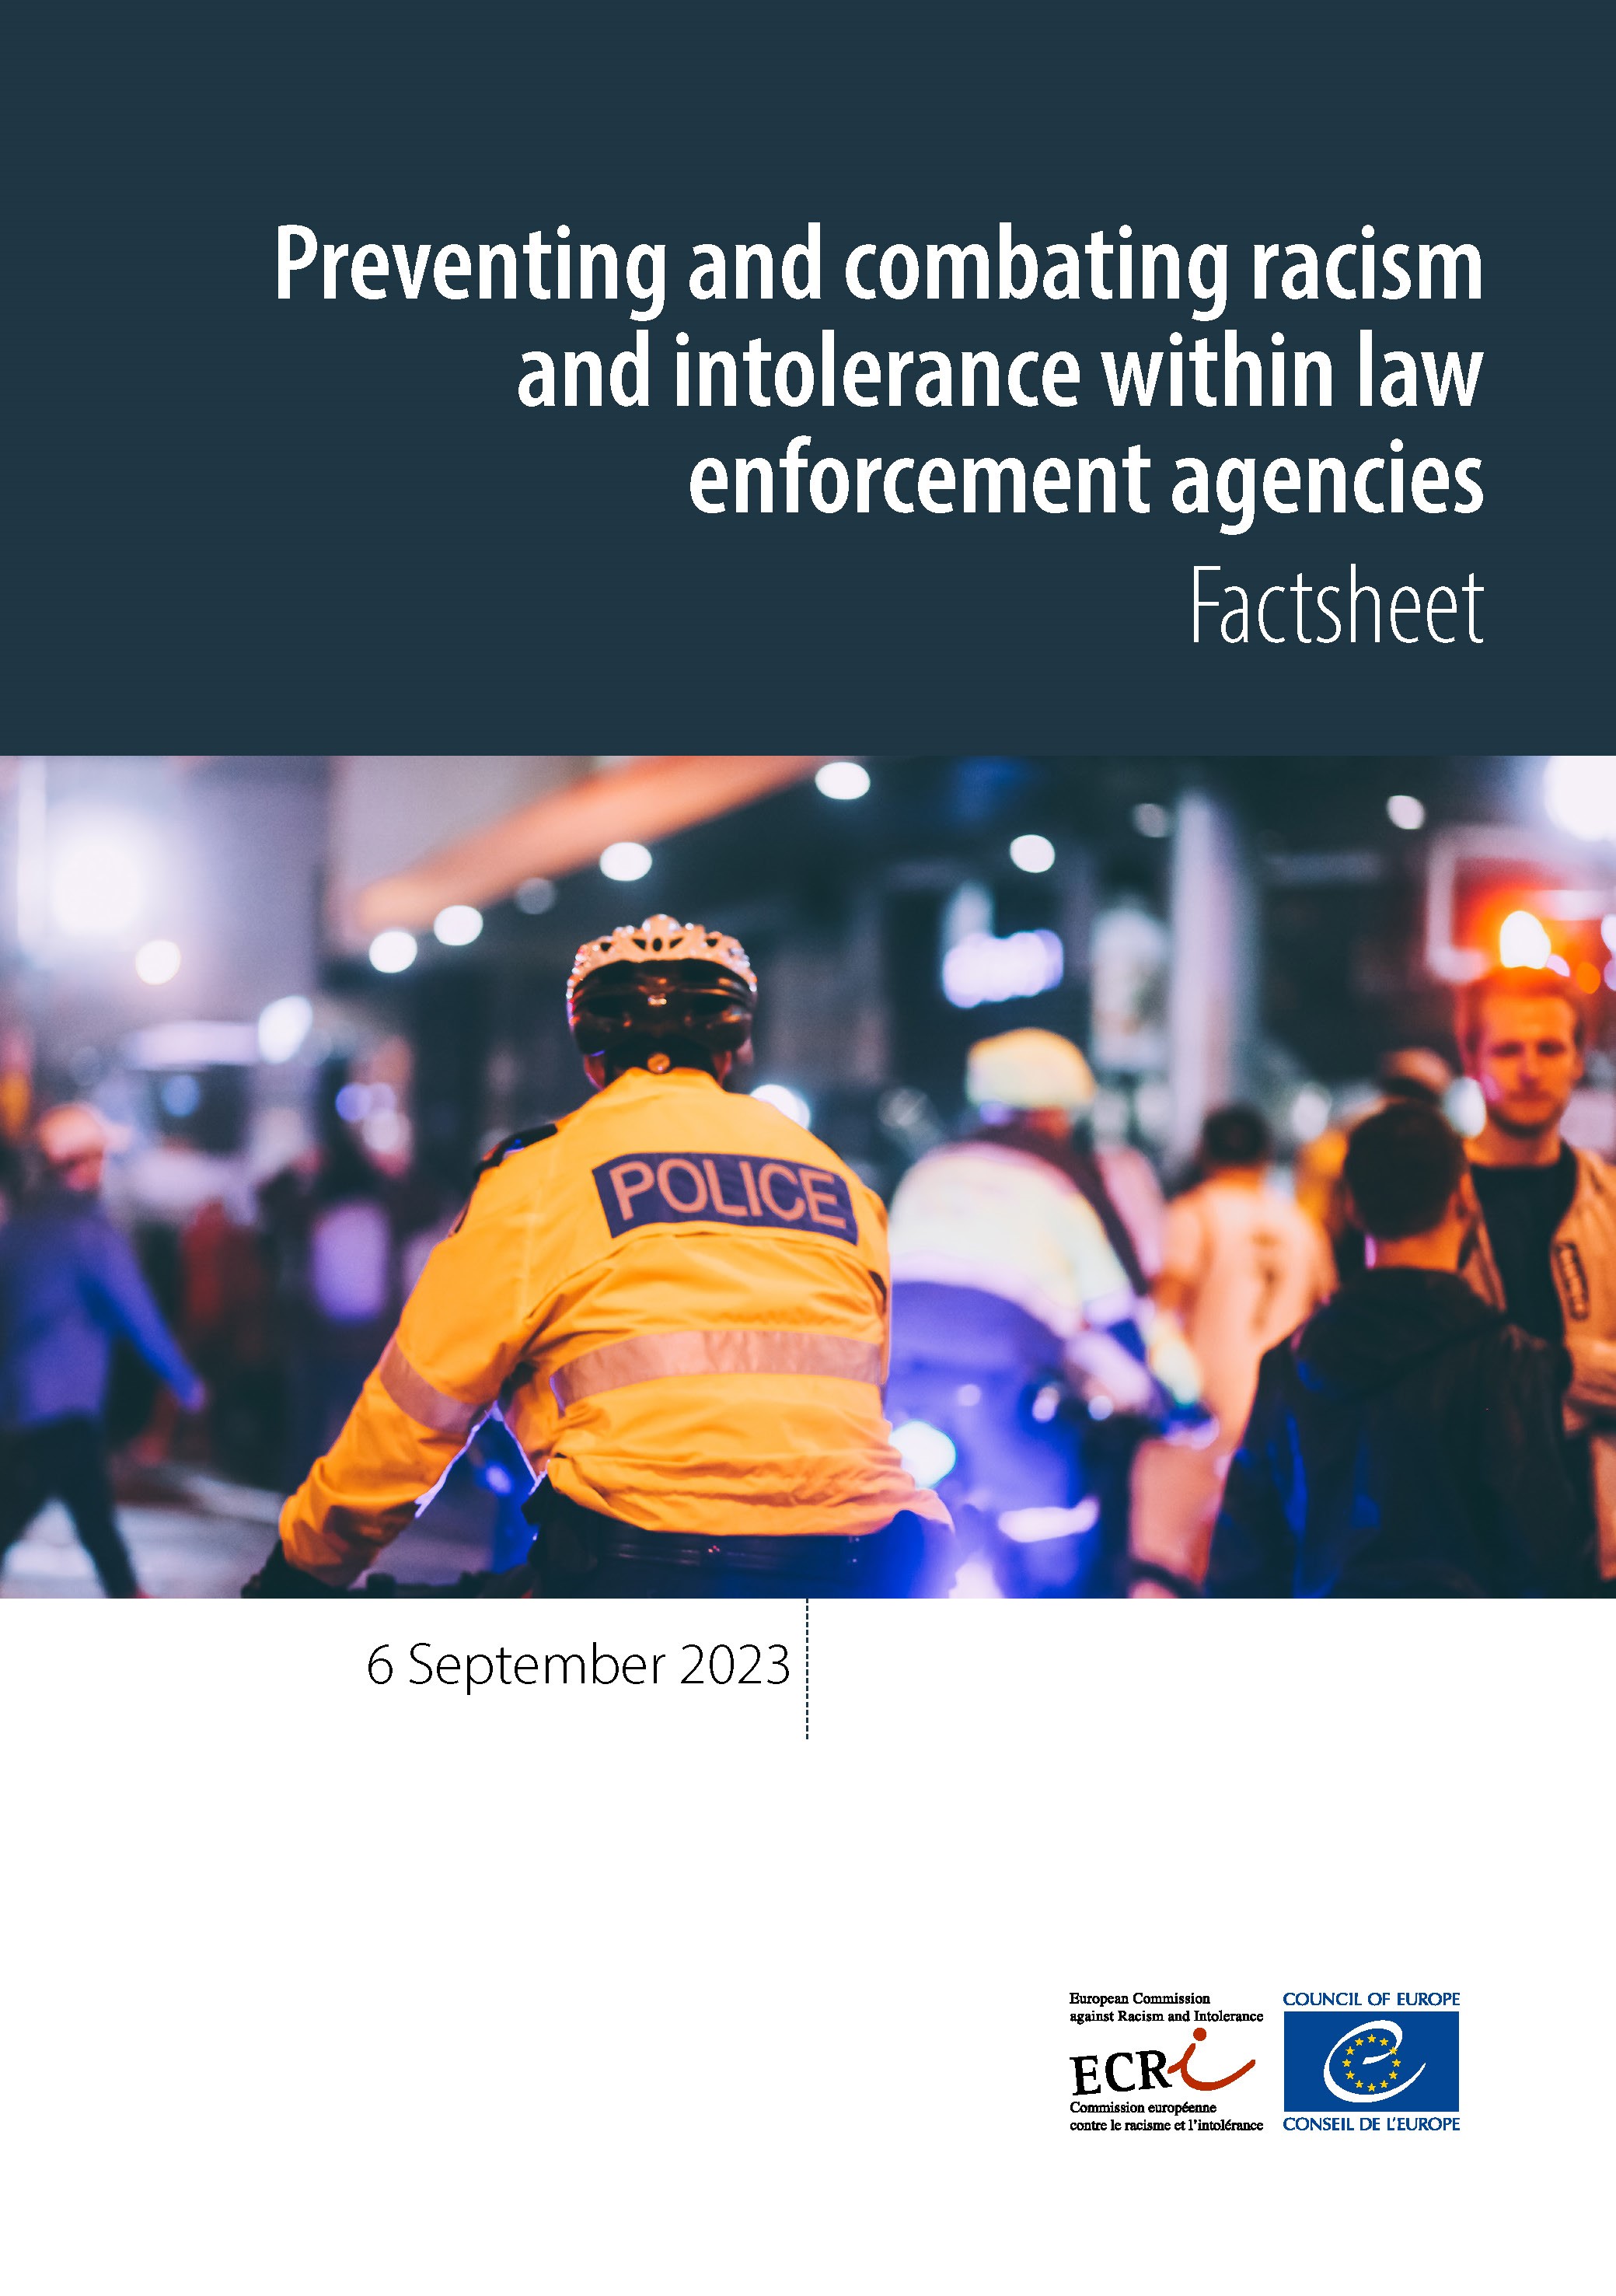 Preventing and combating racism and intolerance within law enforcement agencies